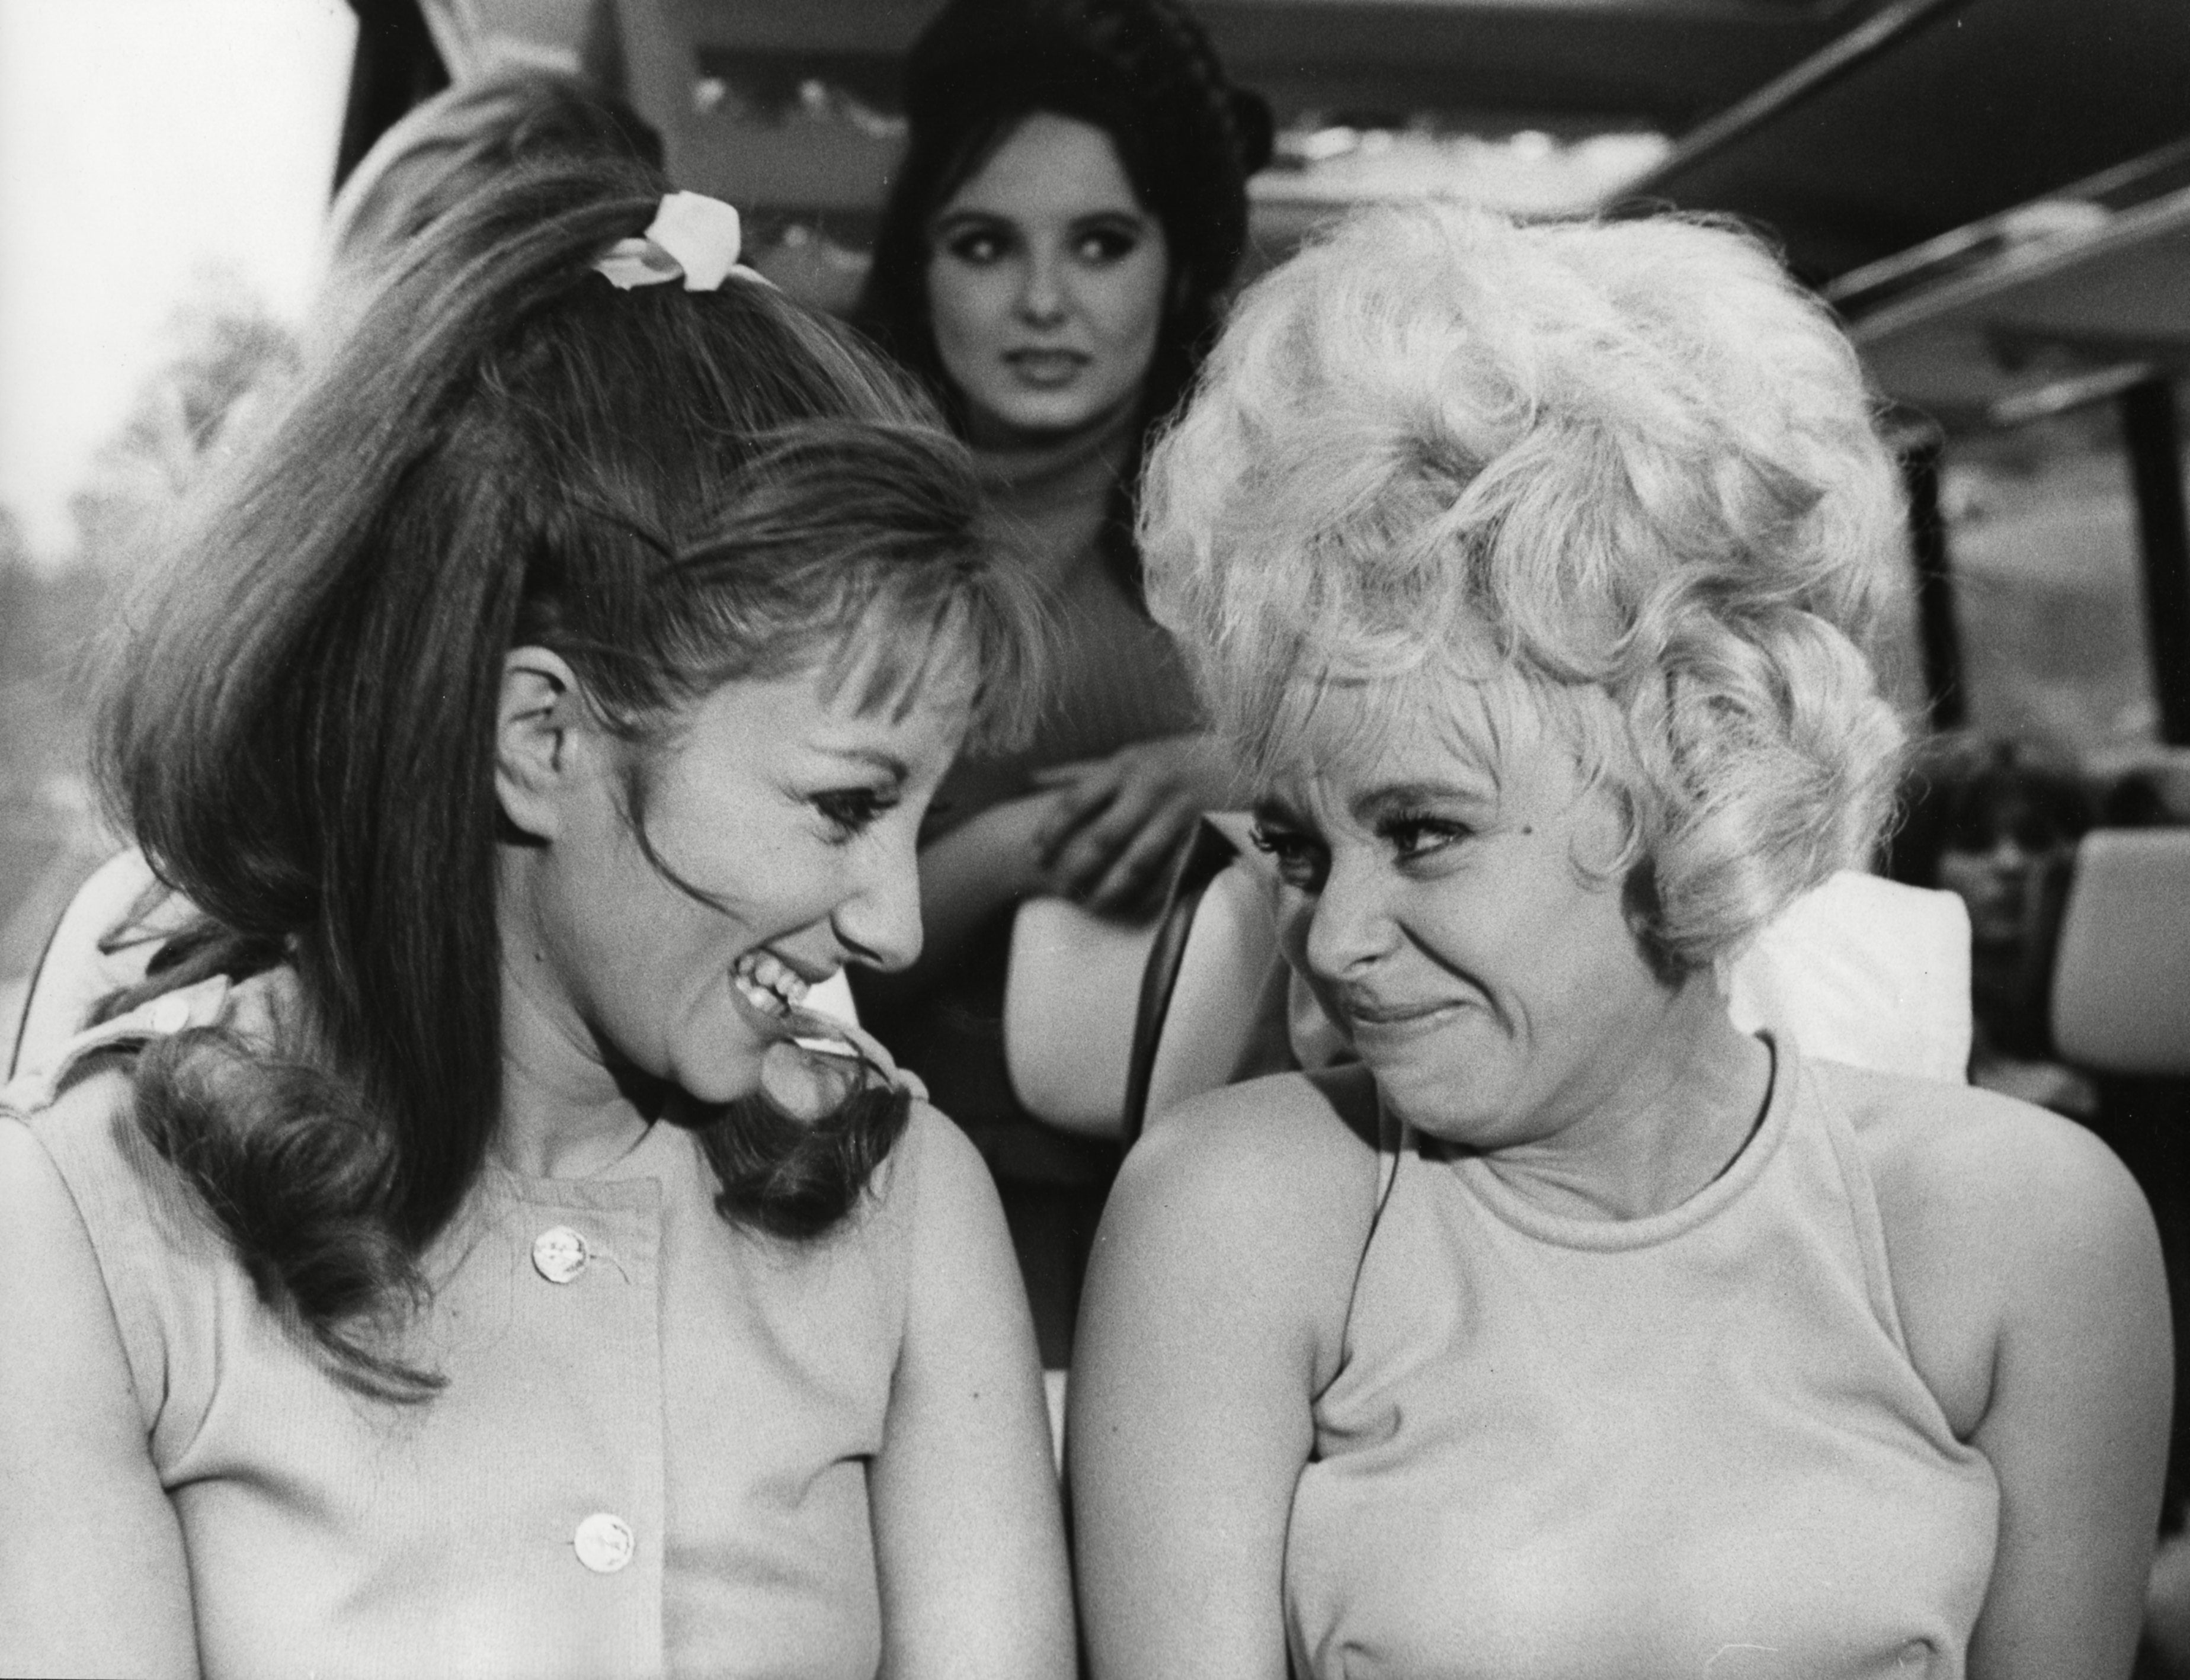 Having a hoot: Sandra Caron and Barbara Windsor in 1969’s ‘Carry on Camping’